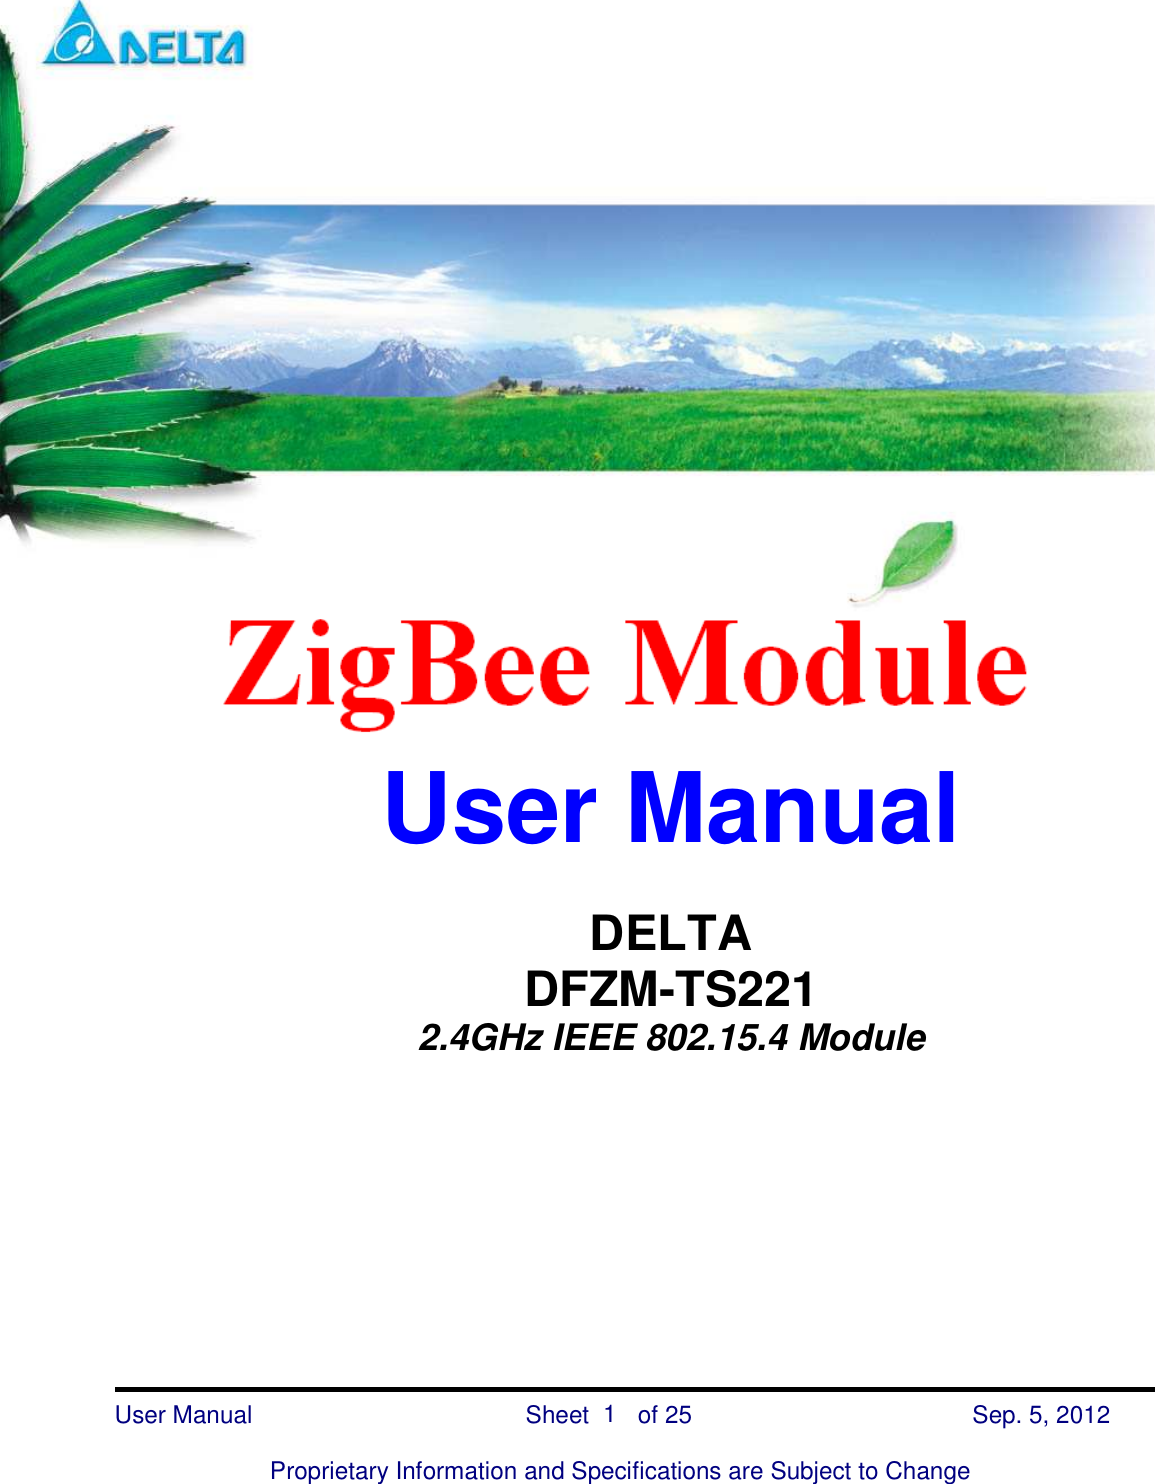    DFZM-TS221    User Manual                            Sheet        of 25      Sep. 5, 2012  Proprietary Information and Specifications are Subject to Change 1               User Manual  DELTA DFZM-TS221 2.4GHz IEEE 802.15.4 Module   